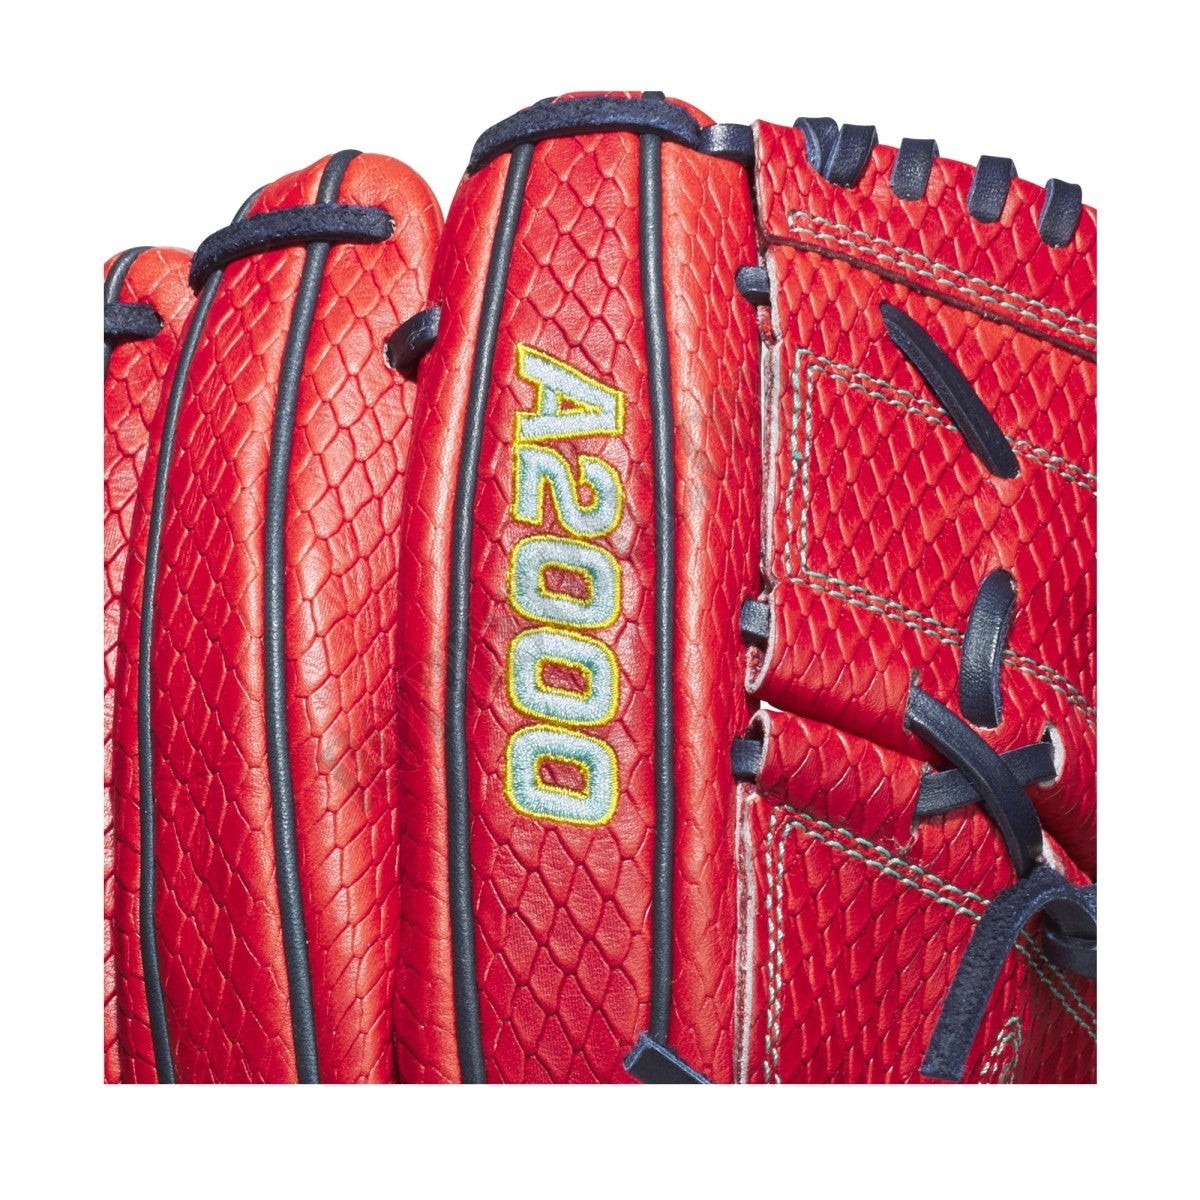 2021 A2000 B2 12" Mike Clevinger Game Model Pitcher's Baseball Glove ● Wilson Promotions - -6